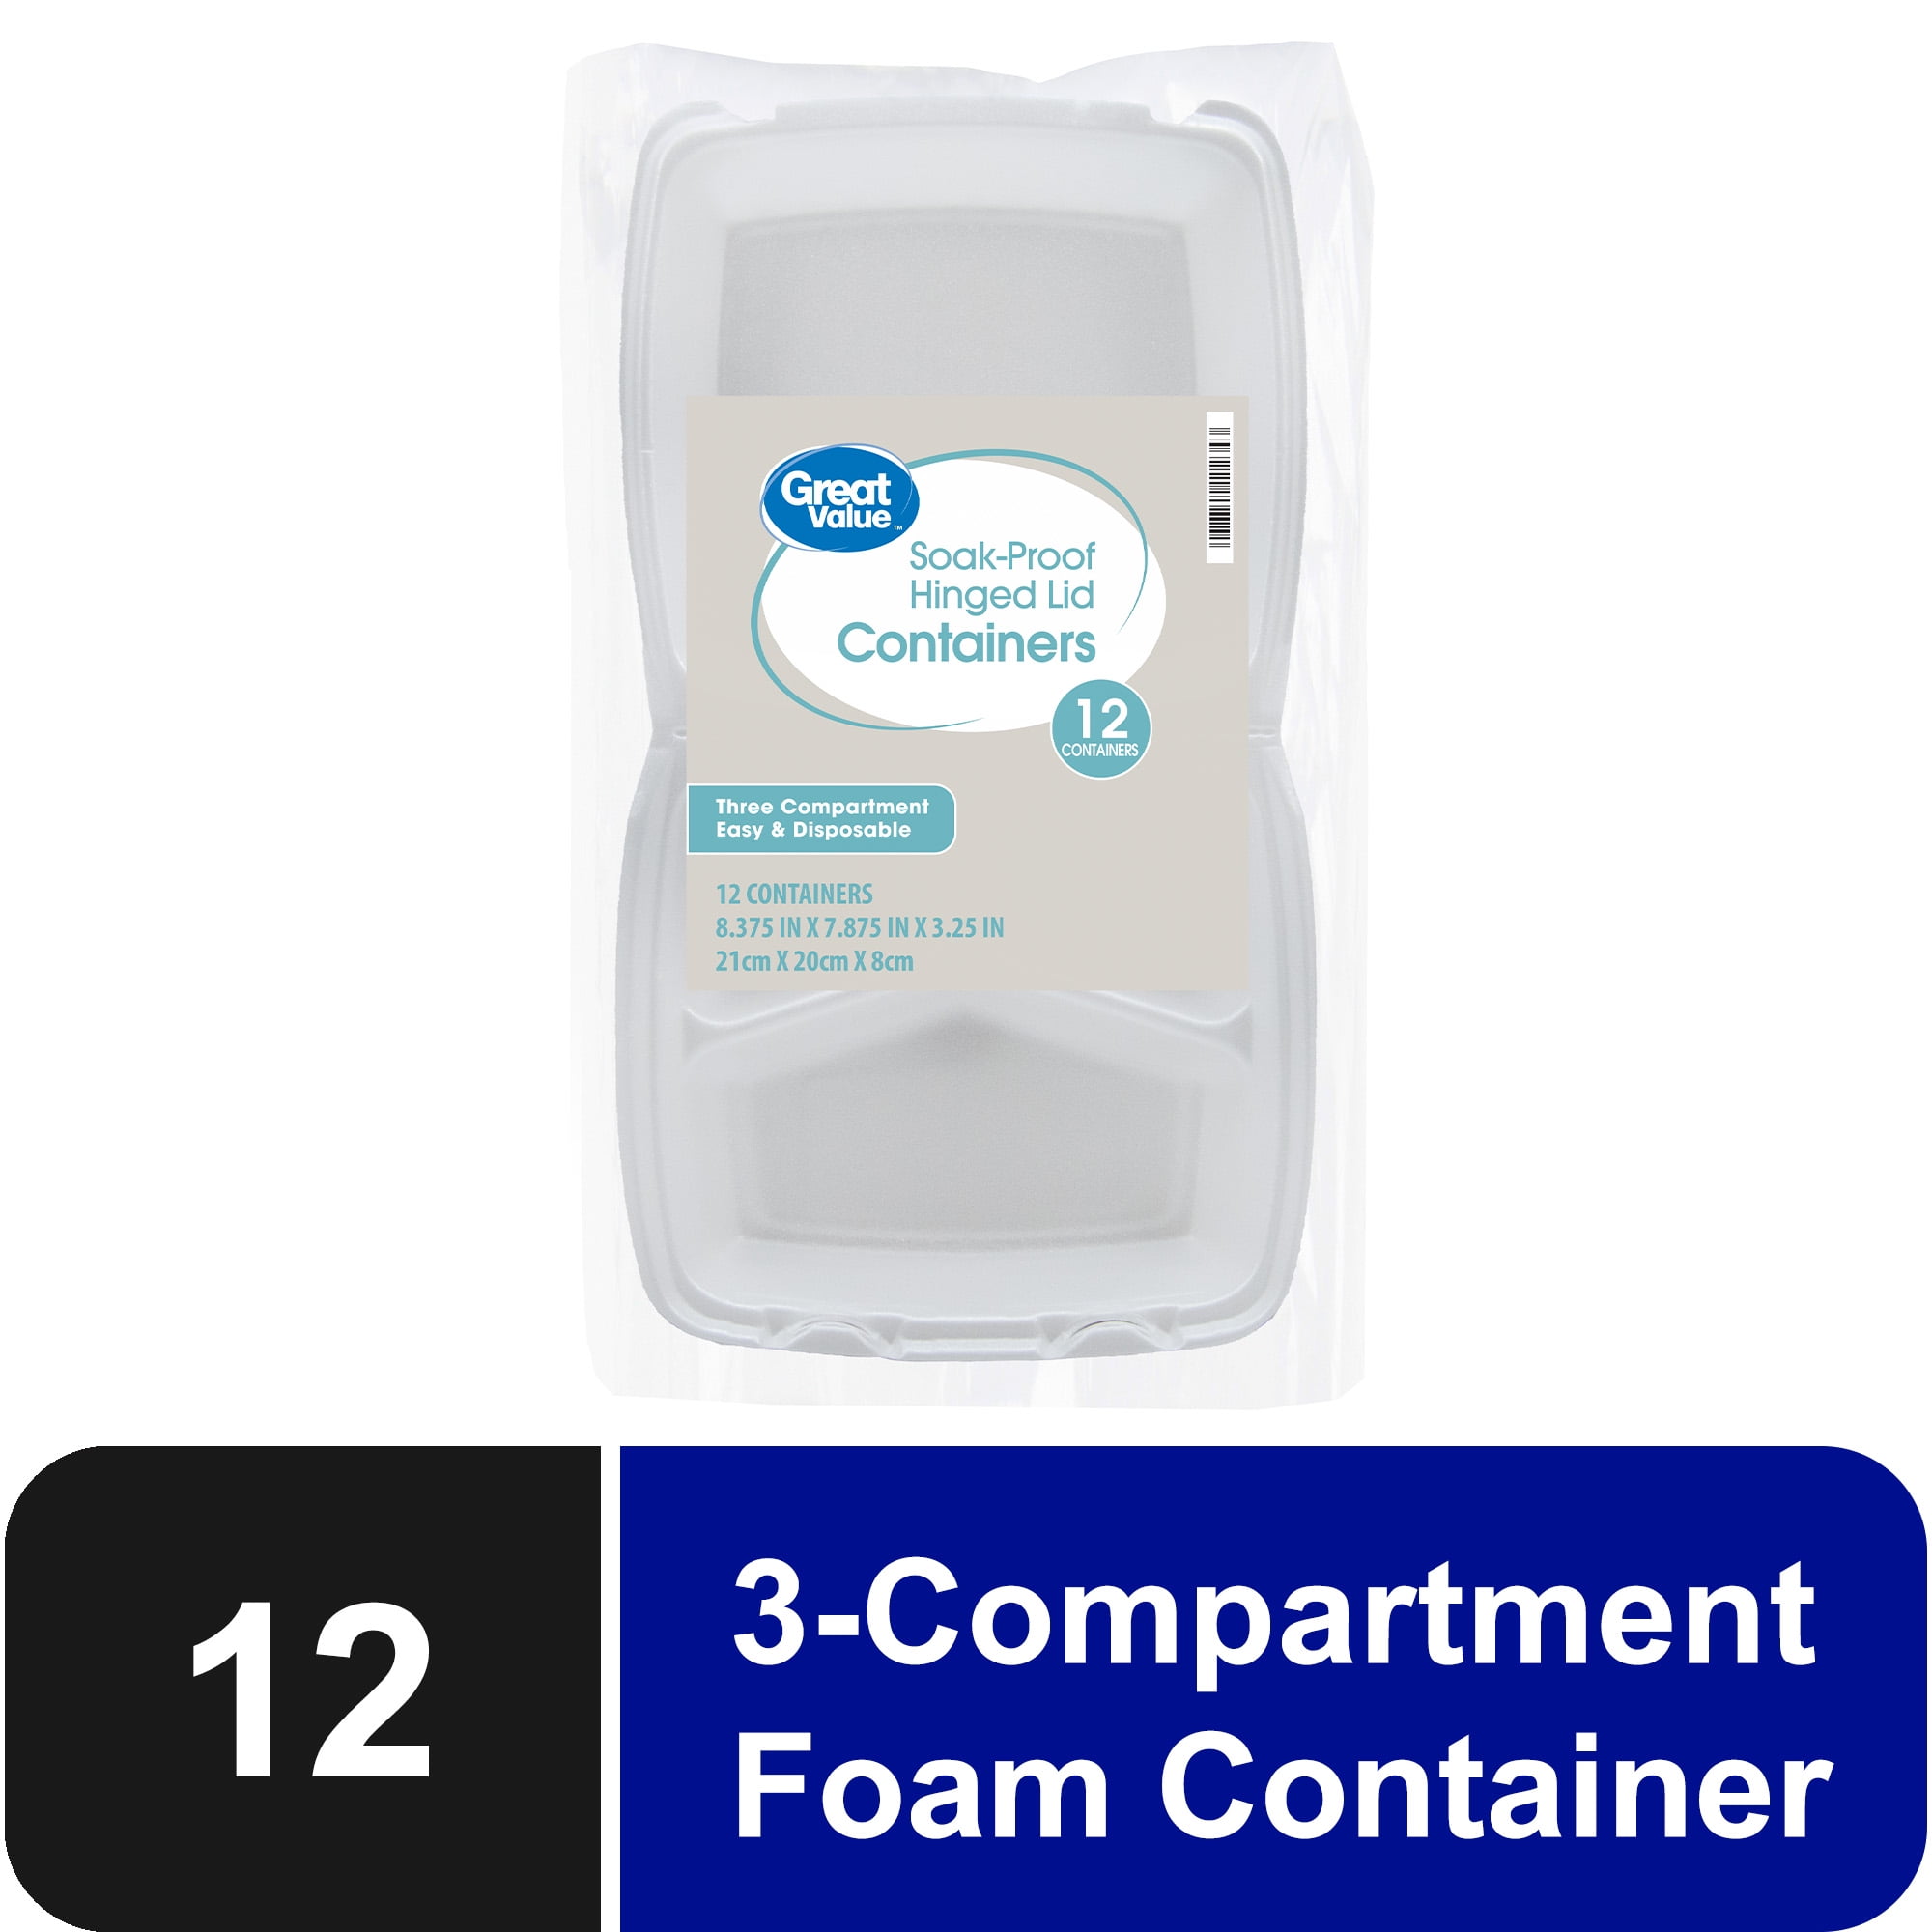 Open Foam Hinged Three Compartment Meal Container Stock Photo